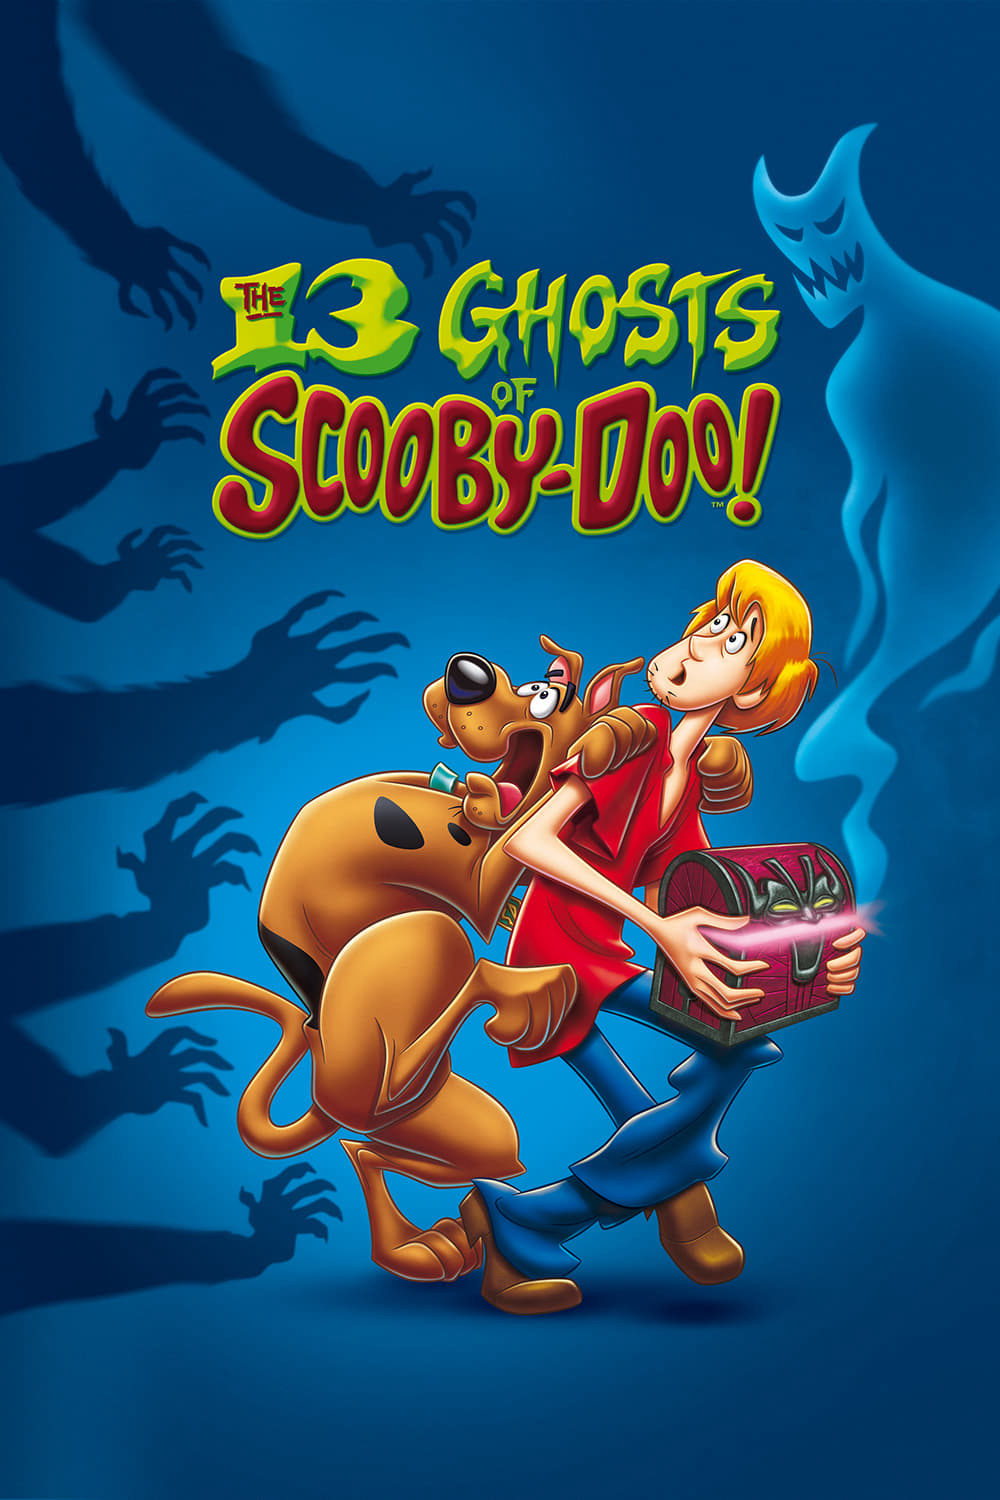 Poster Phim The 13 Ghosts of Scooby-Doo (The 13 Ghosts of Scooby-Doo)